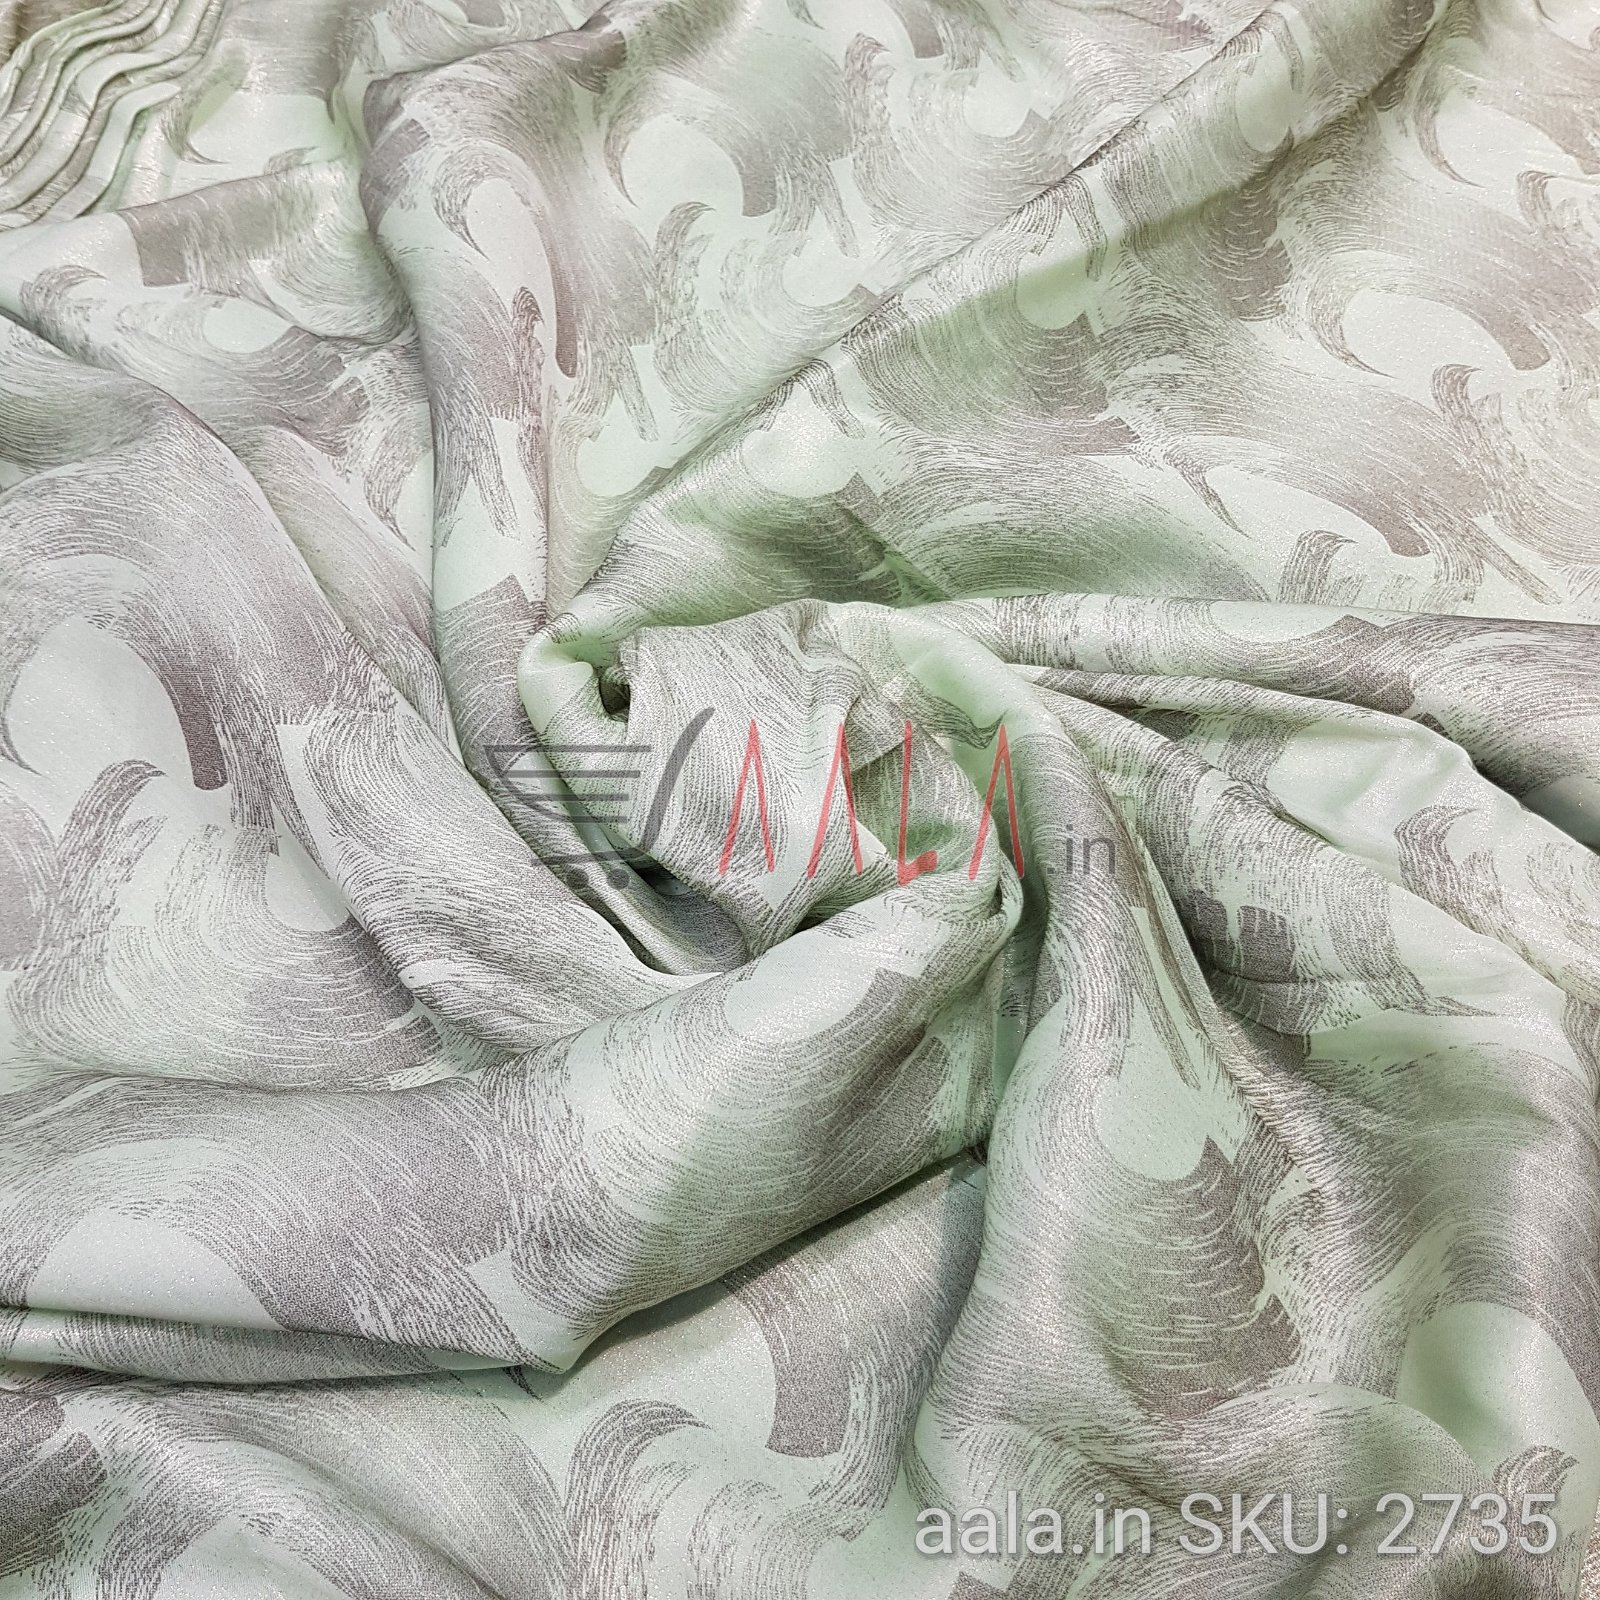 Foil Print Satin Georgette Poly-ester 44 Inches Dyed Per Metre #2735